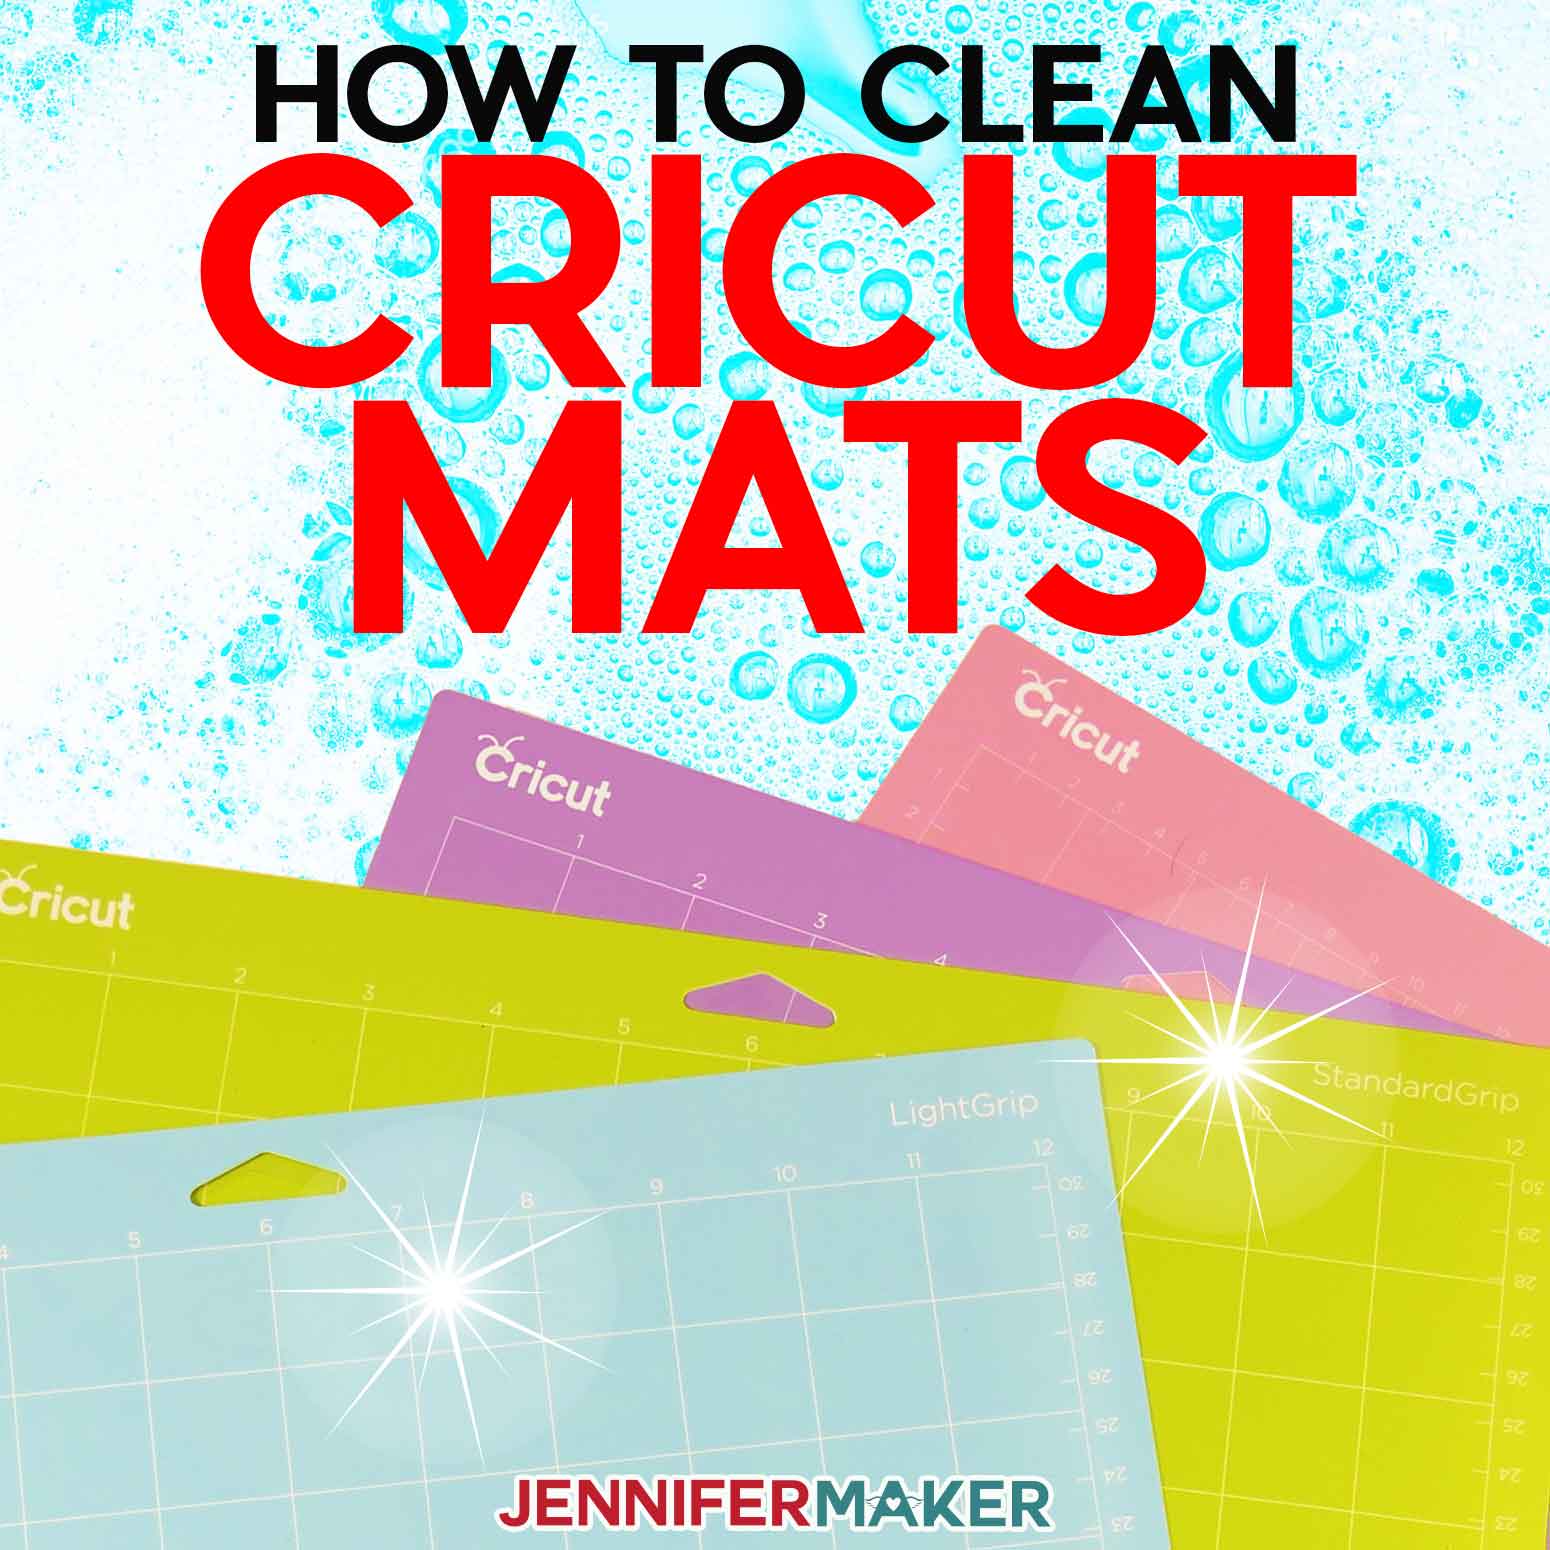 How to clean cricut mat with baby wipe, wet wipe, or Dawn dish soap